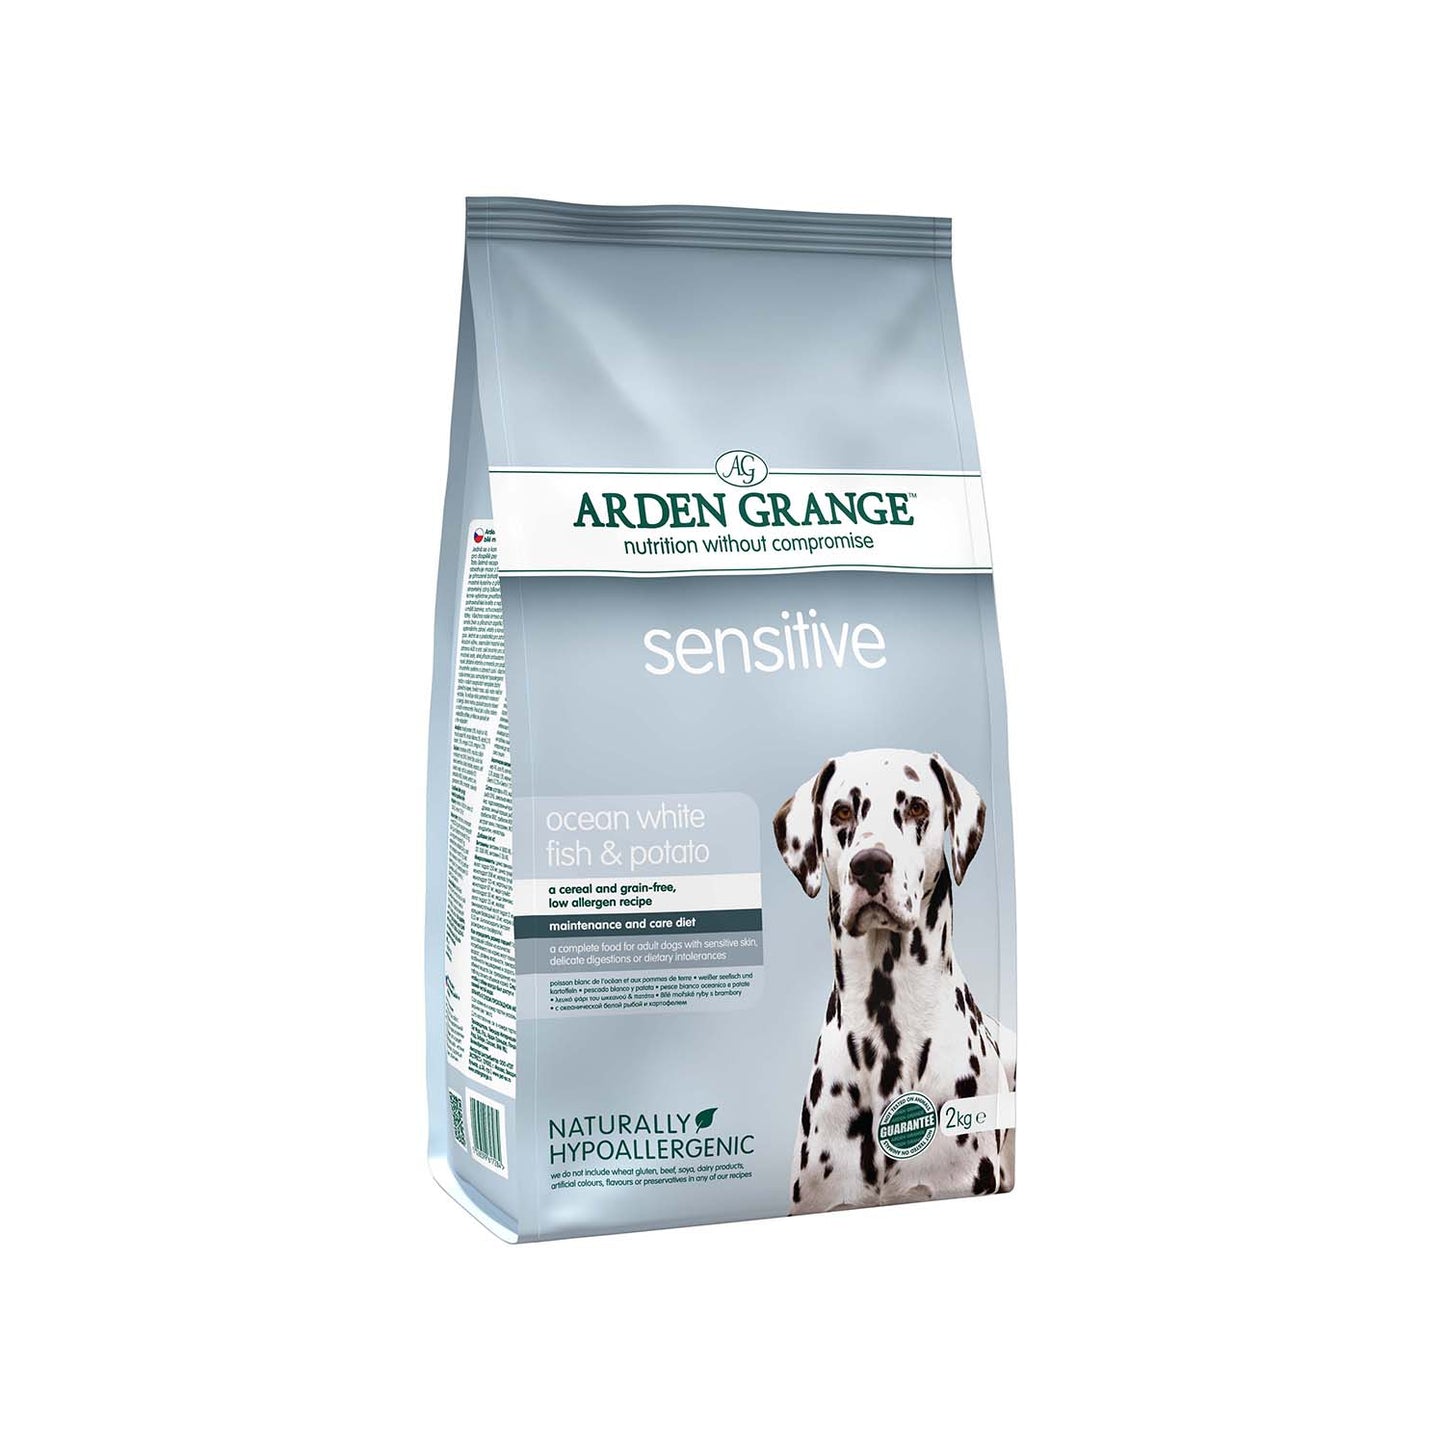 Arden Grange - Sensitive Dry Food Ocean White Fish and Potato For Adult Dogs